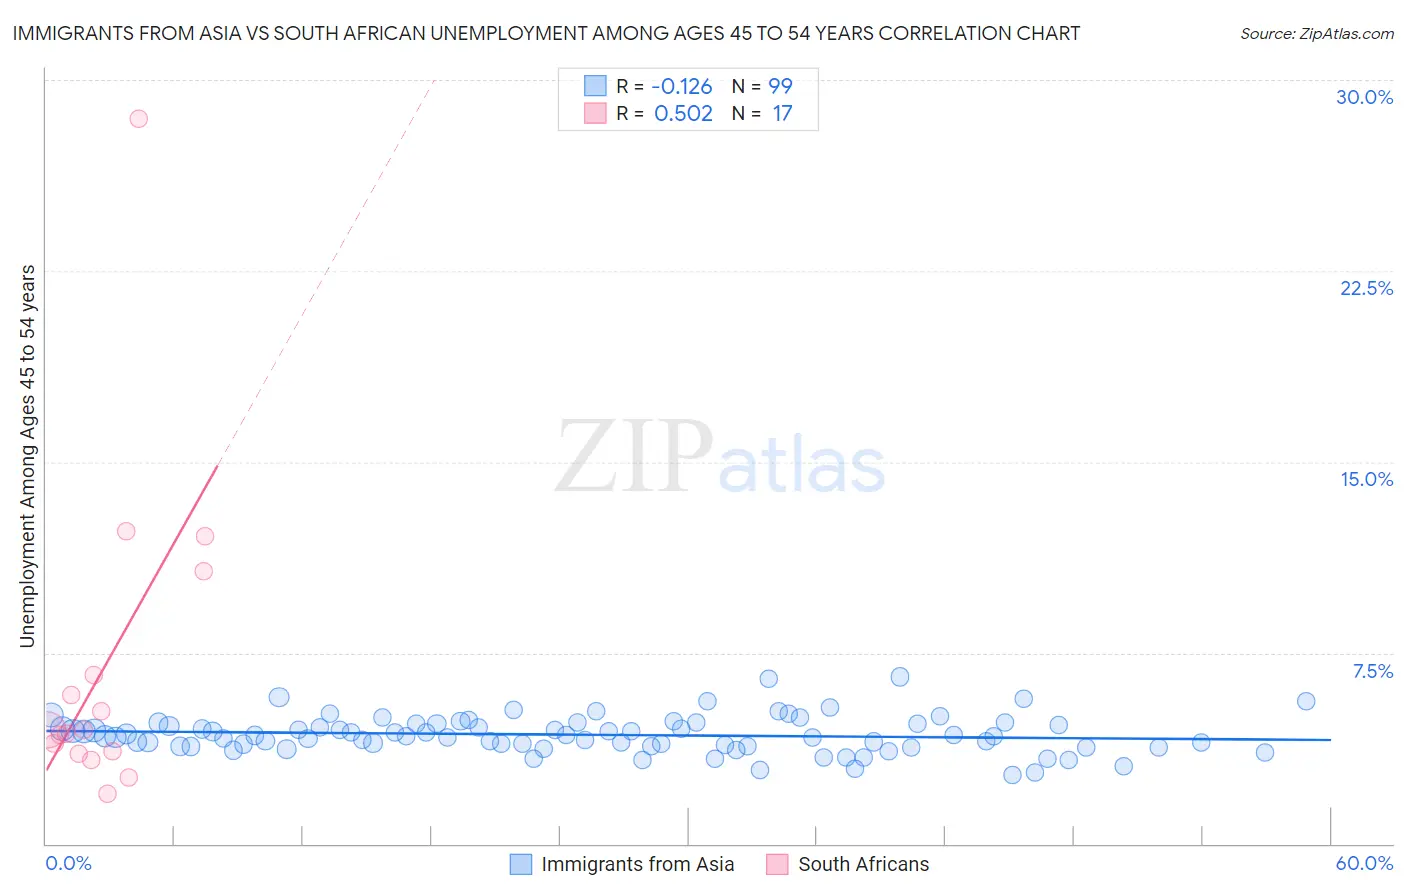 Immigrants from Asia vs South African Unemployment Among Ages 45 to 54 years